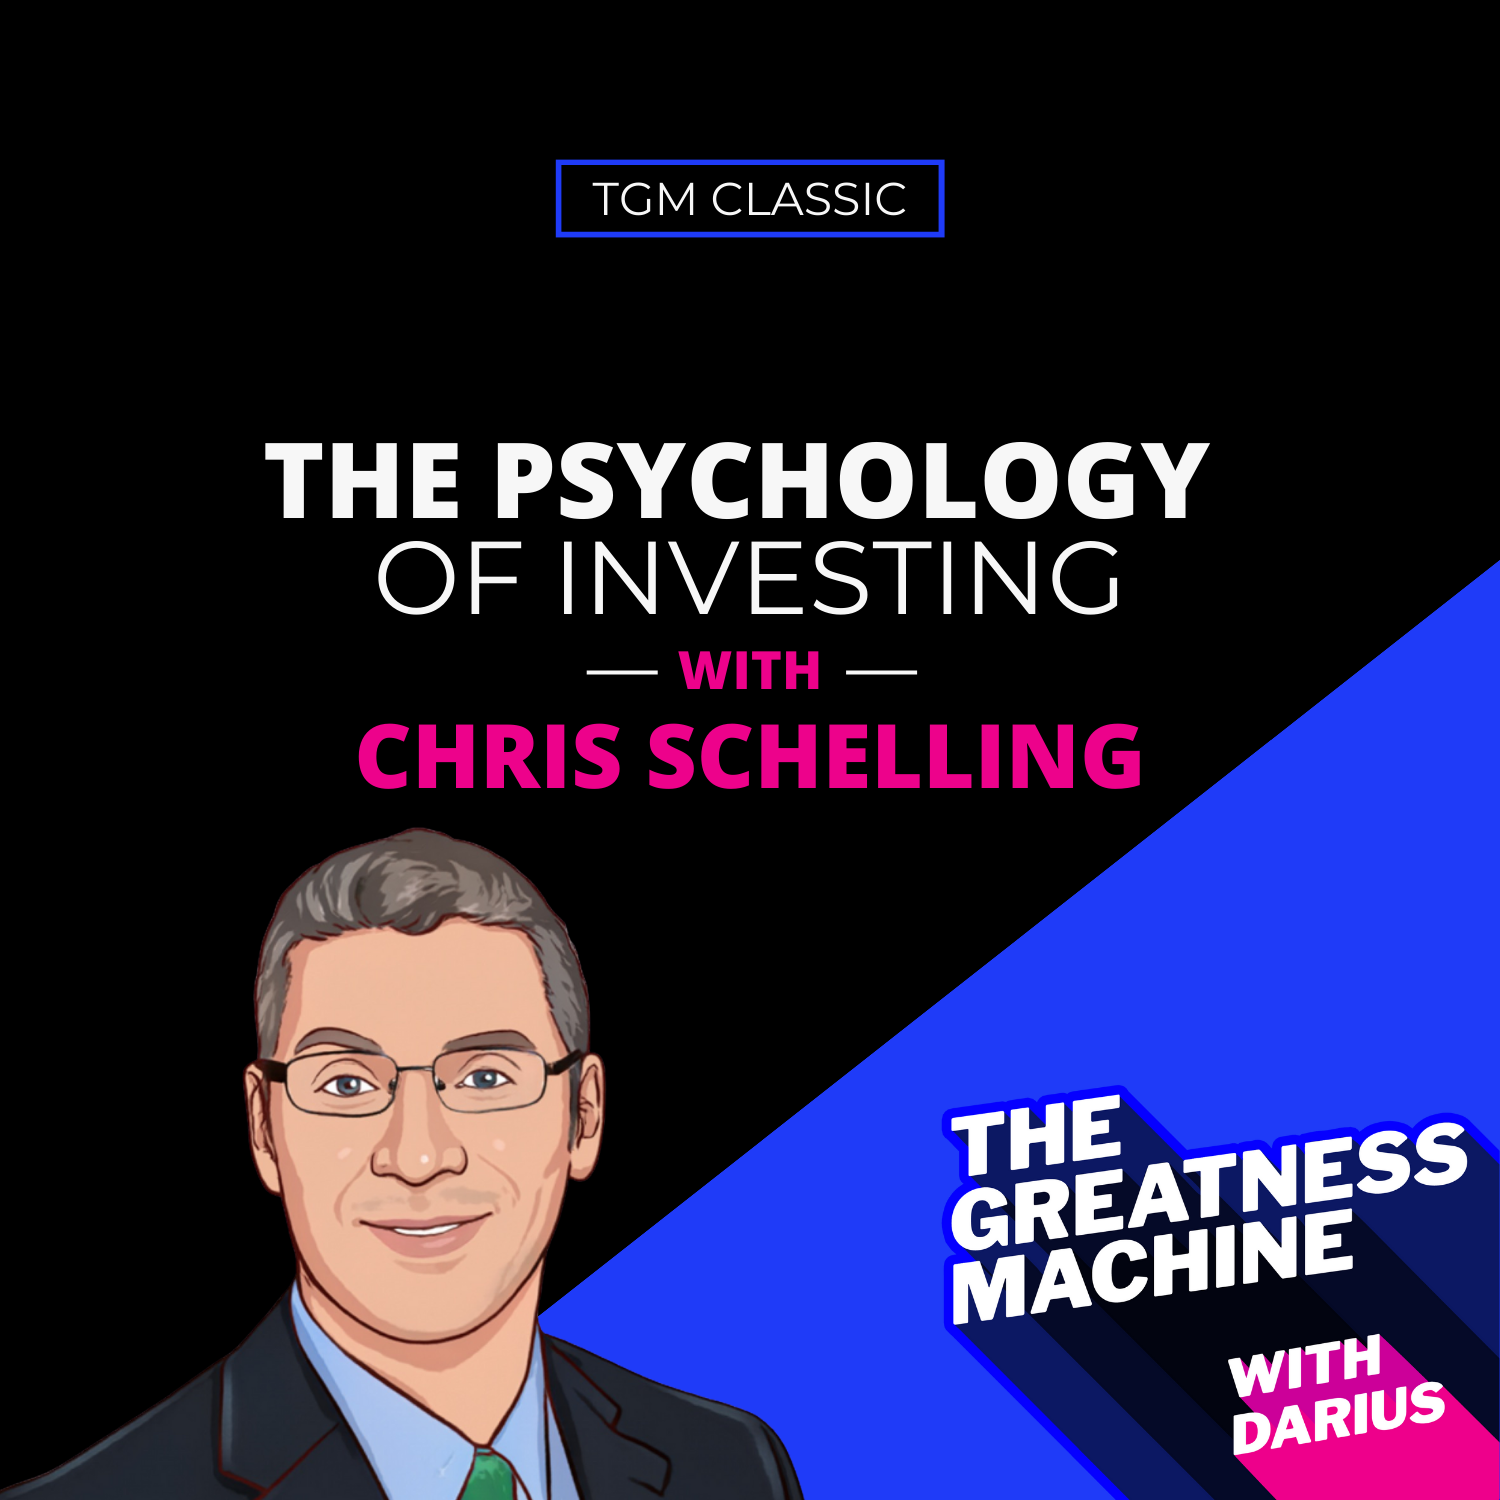 THE GREATNESS MACHINE PODCAST (1500x1500 px) - 2023-04-14T095116.599